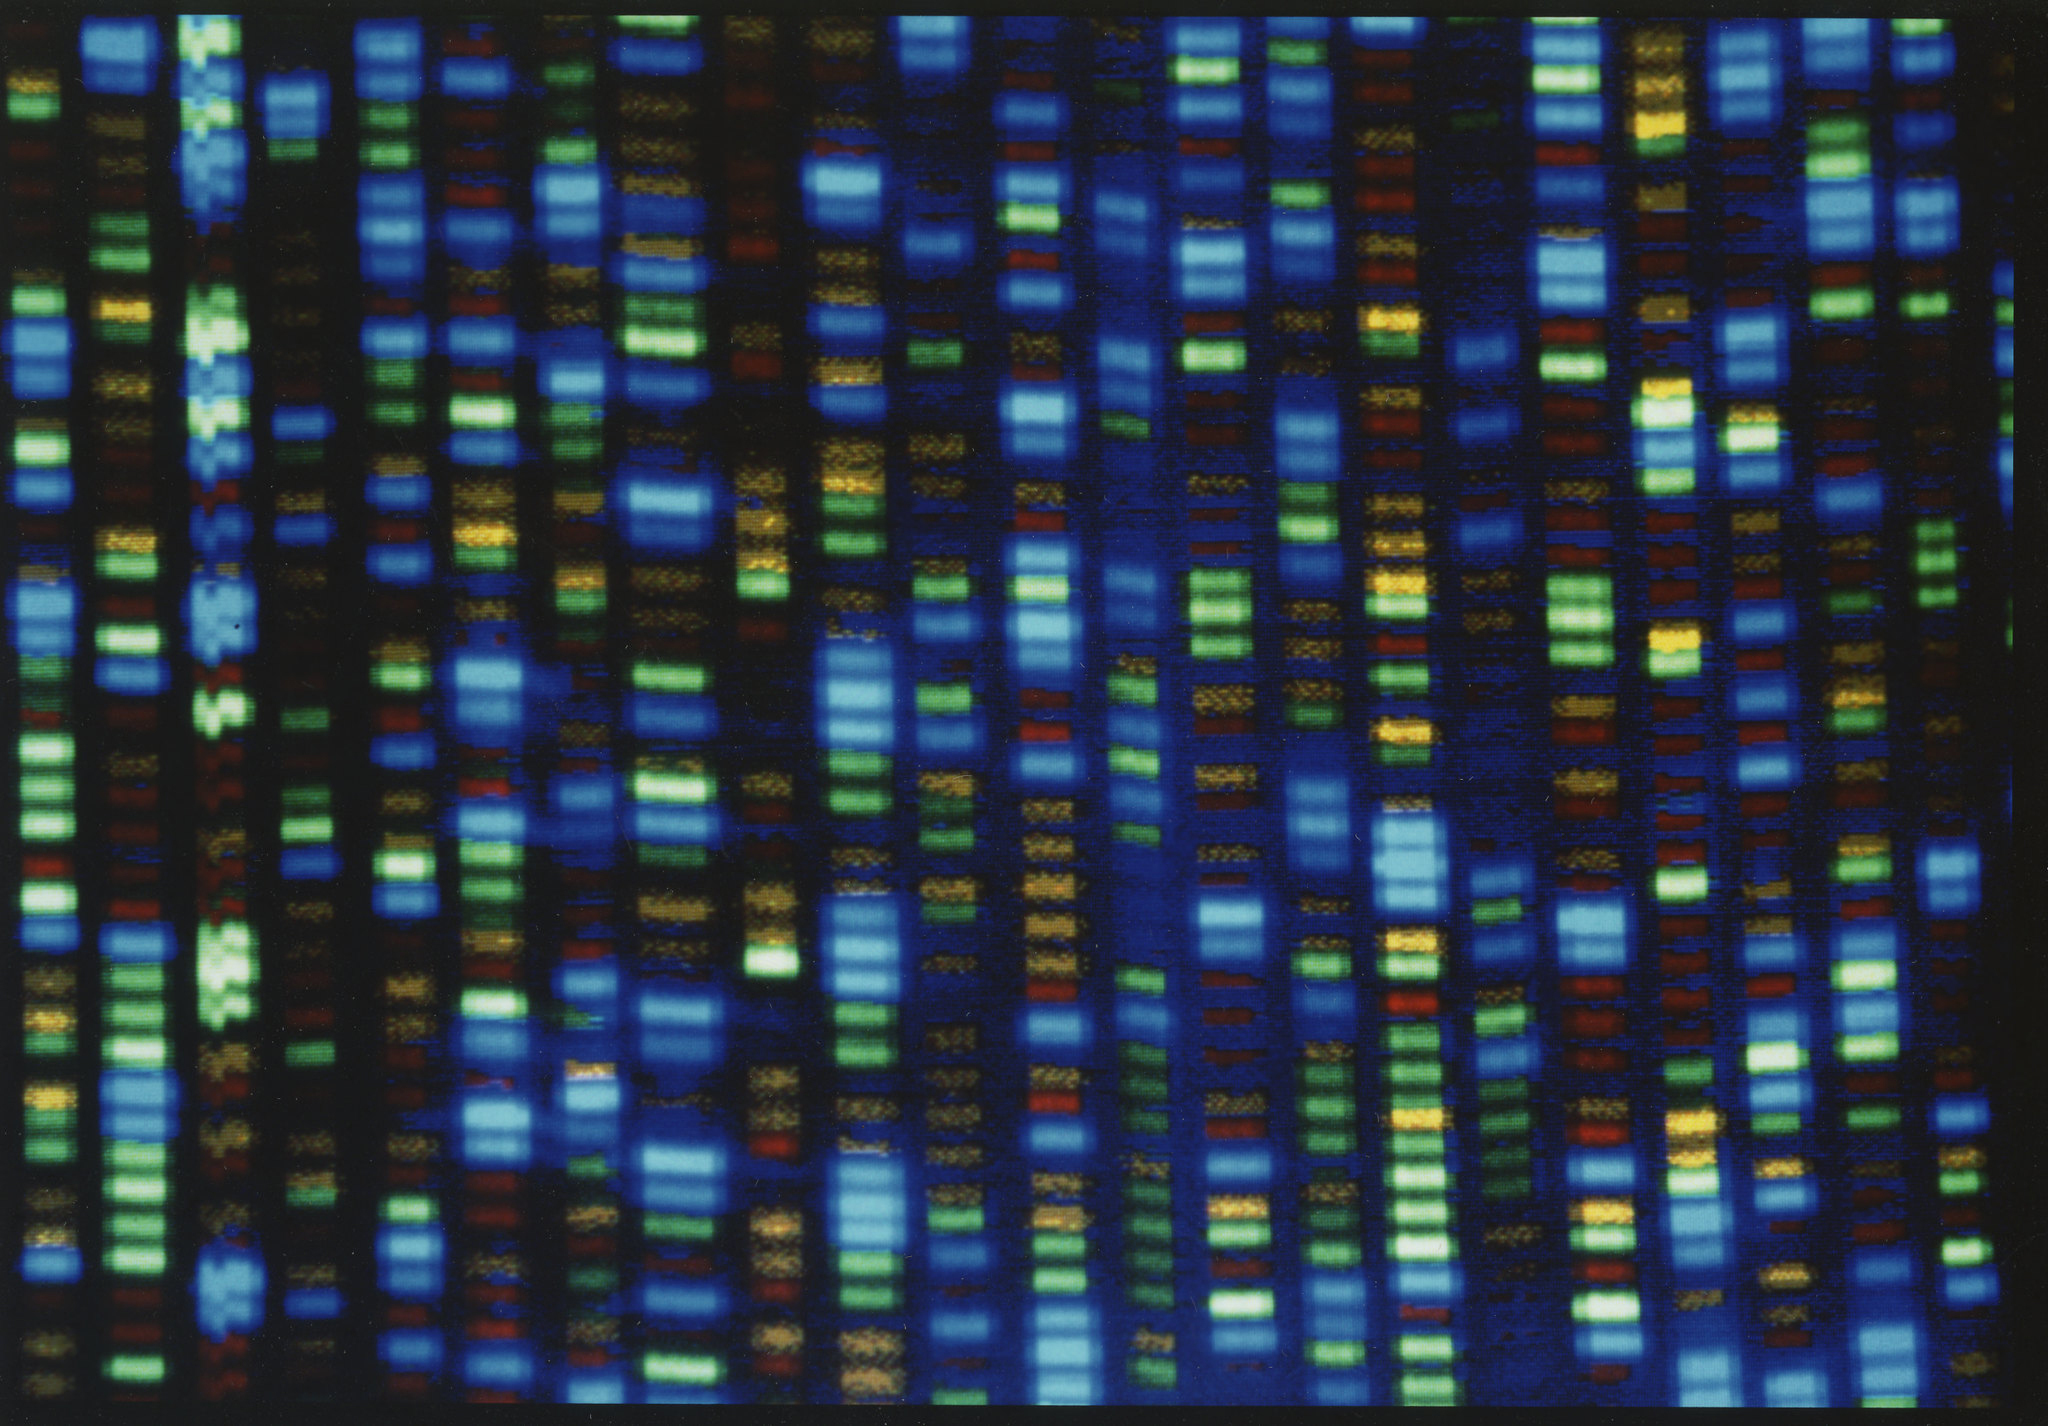 People of African ancestry are poorly represented in genetic studies. A new effort would change that